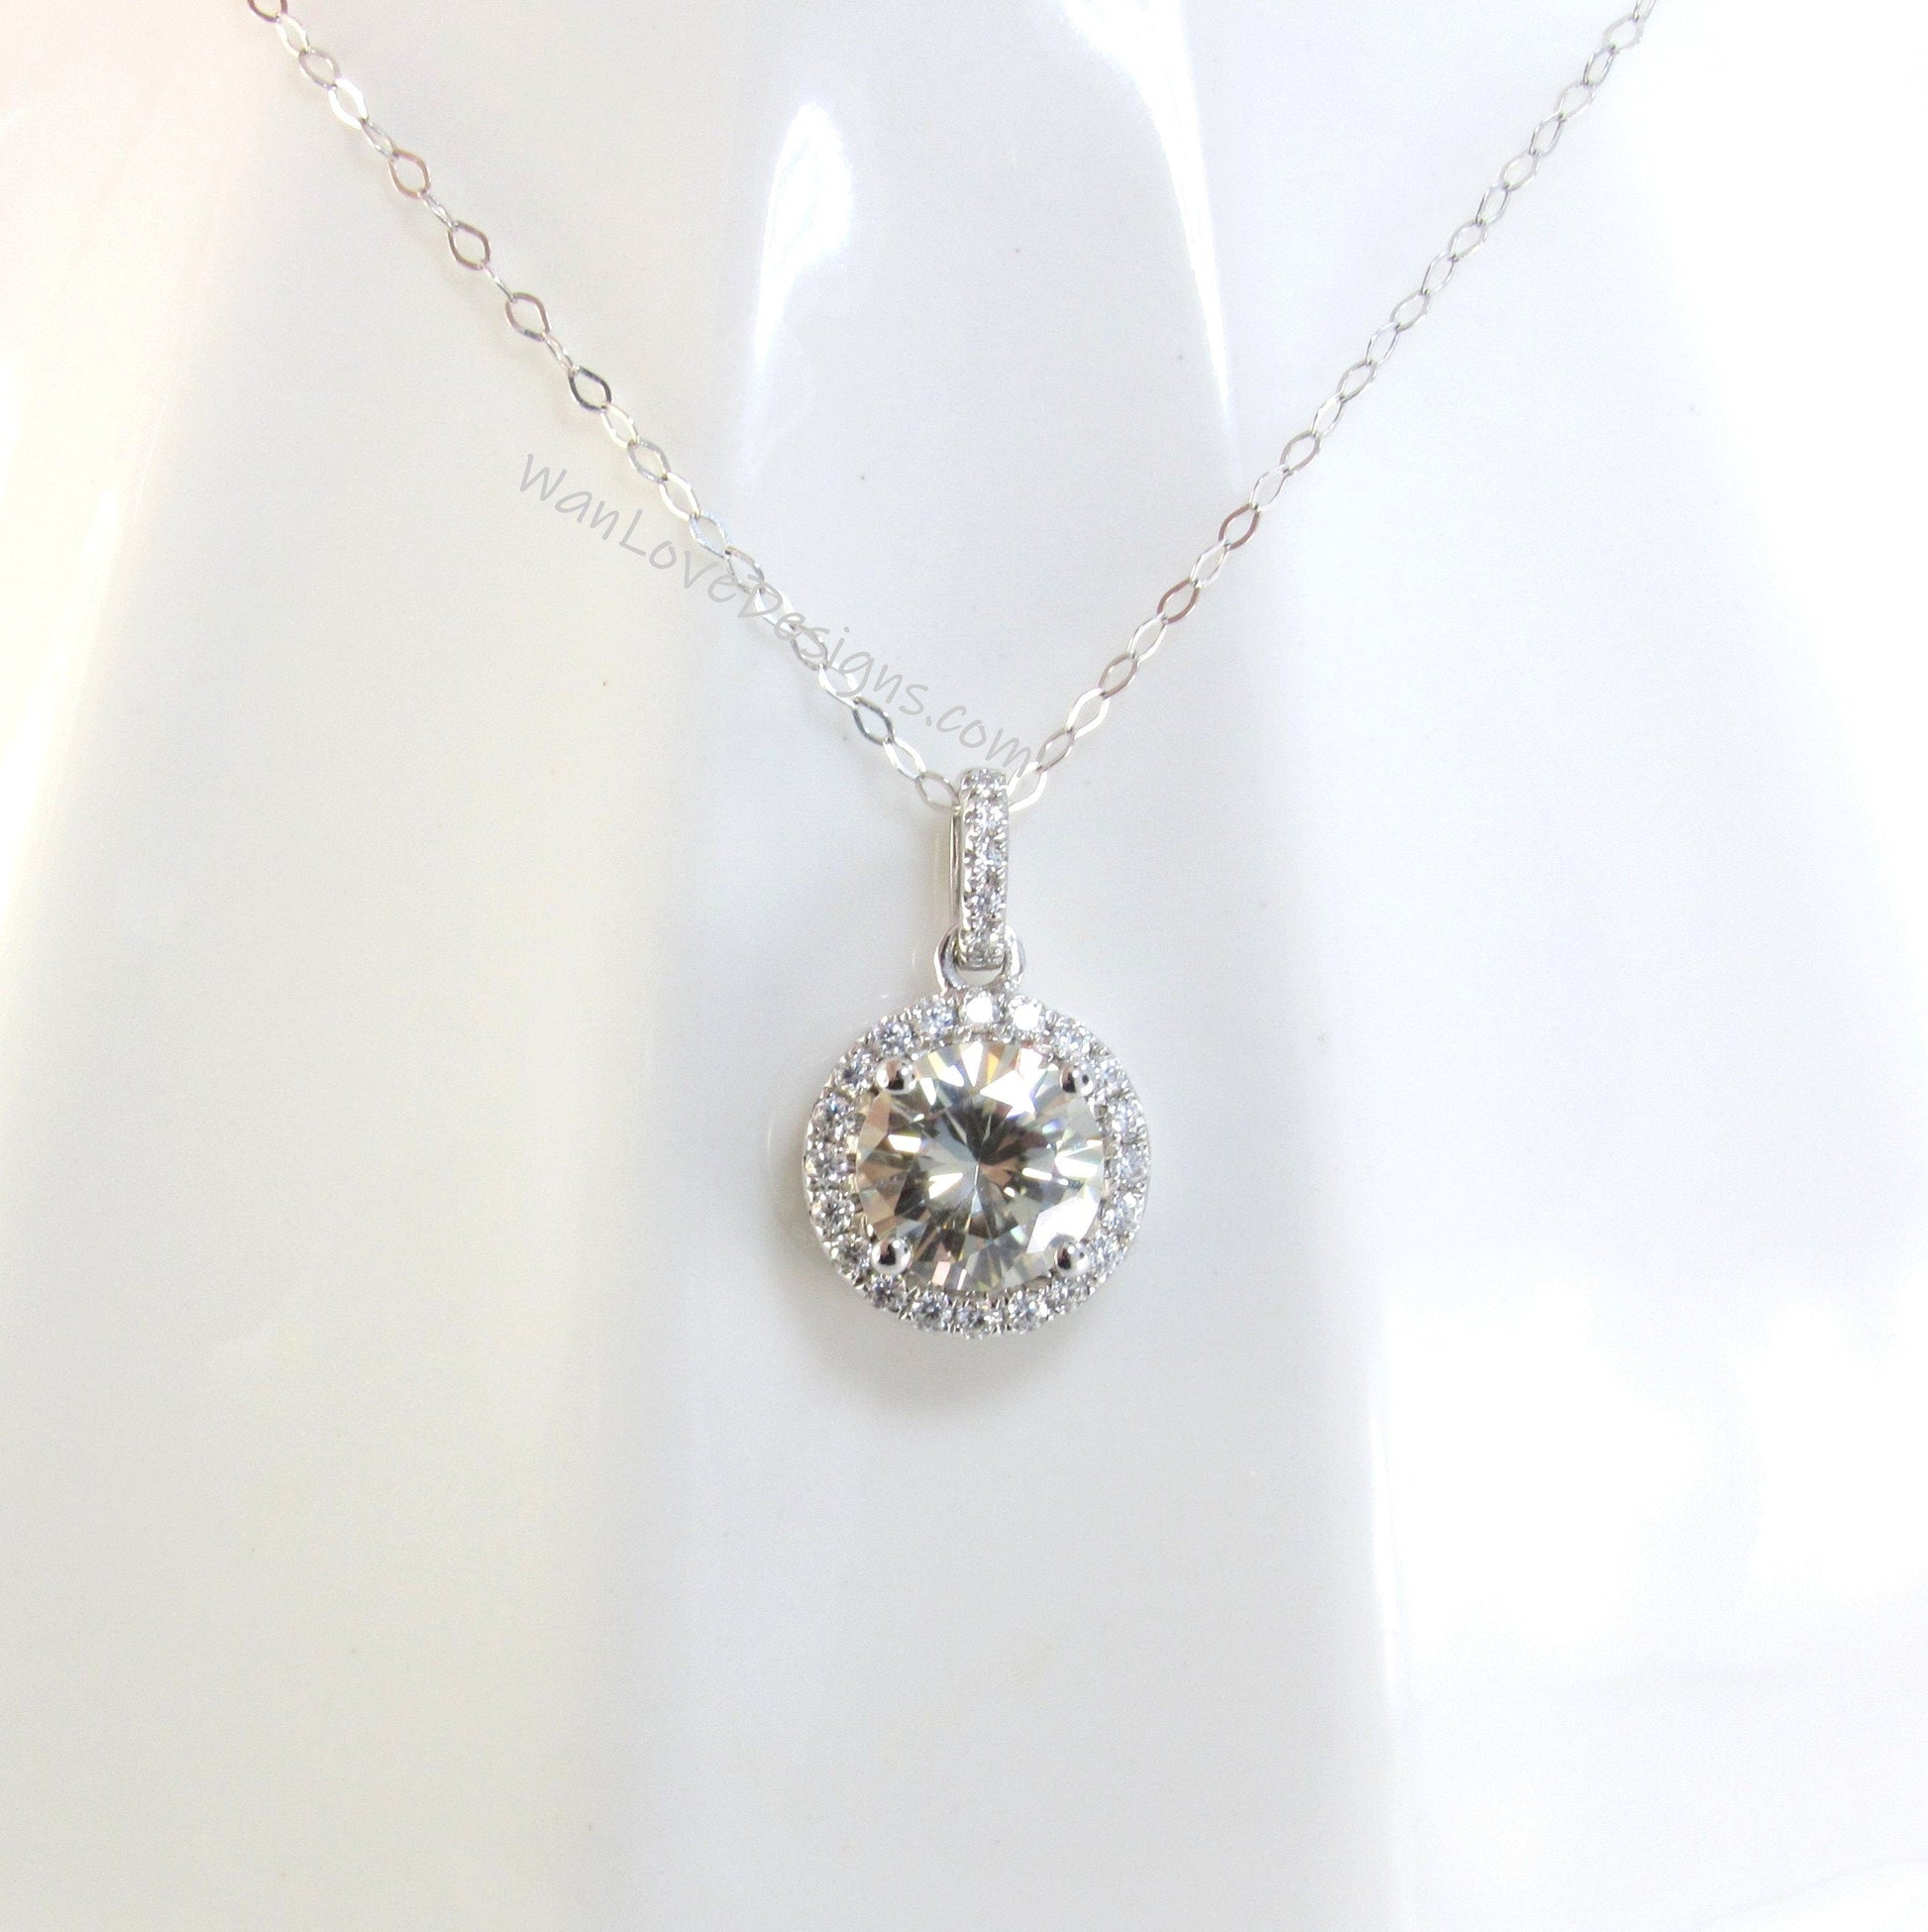 7mm Round Cut Champagne Yellow Color Moissanite Diamond Halo Design 14k White Gold Pendent, Round Shaped Diamond Halo Pendent,Bridal Jewelry Wan Love Designs